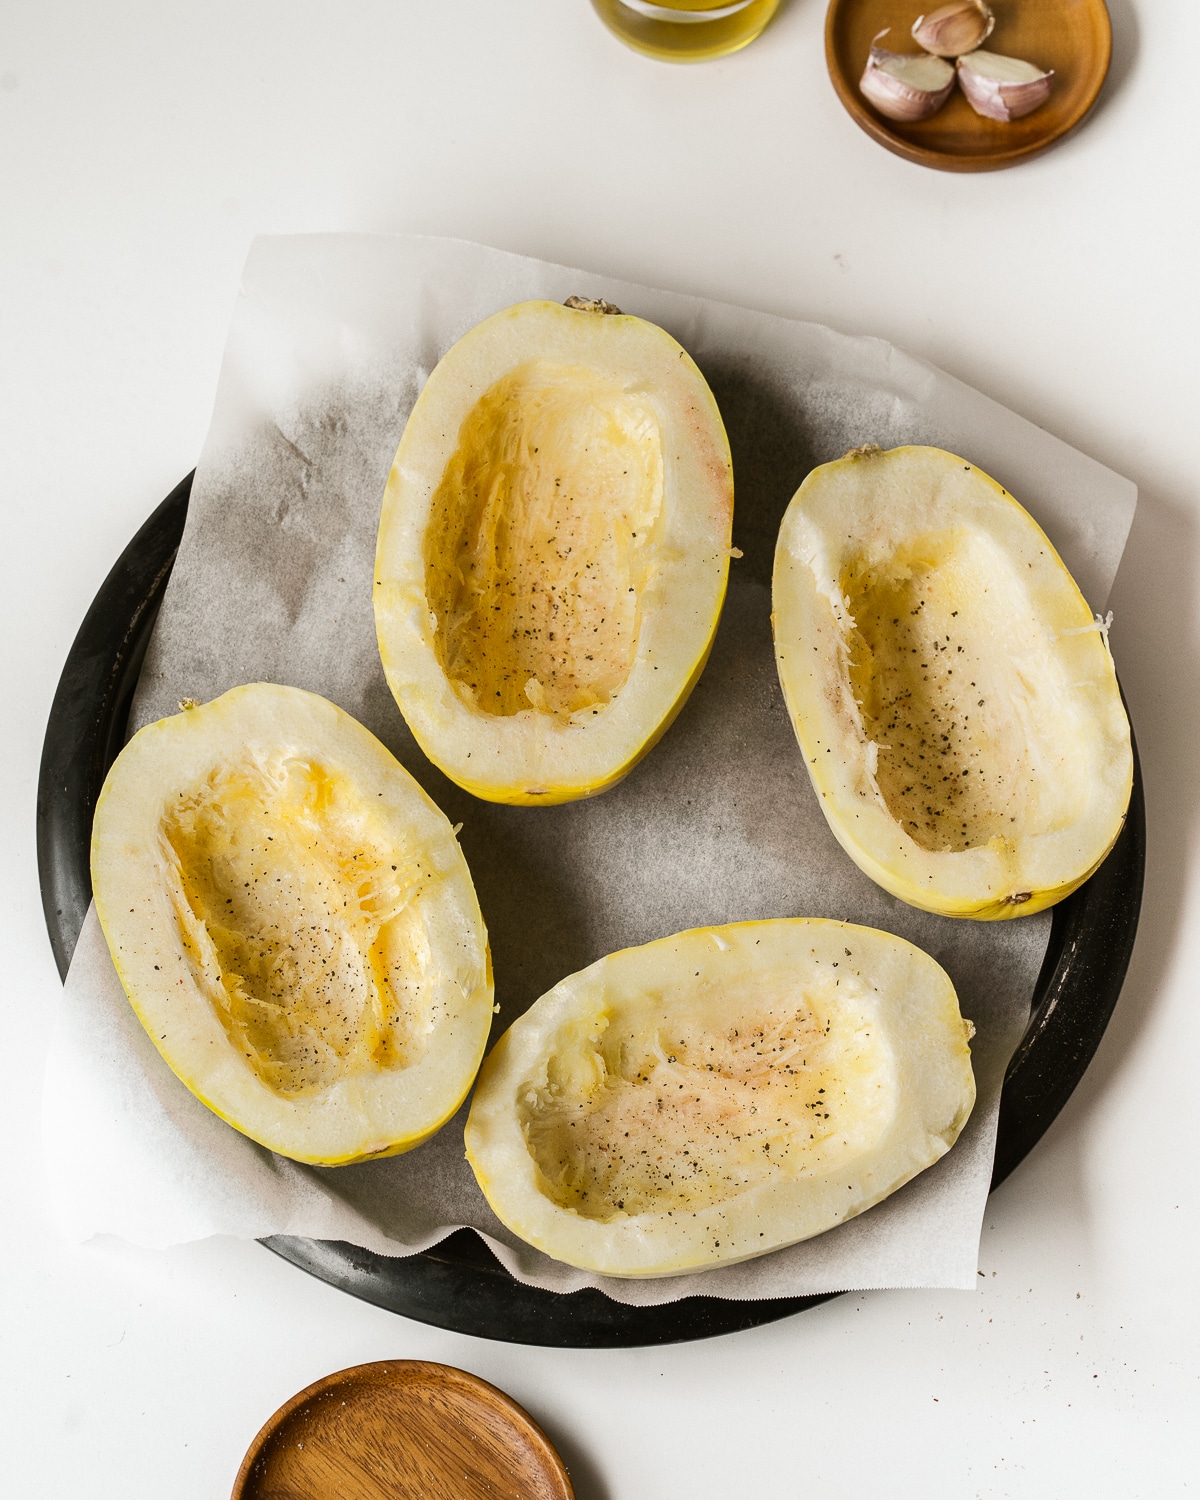 Picture of four spaghetti squash halves on parchment paper on a black tray.